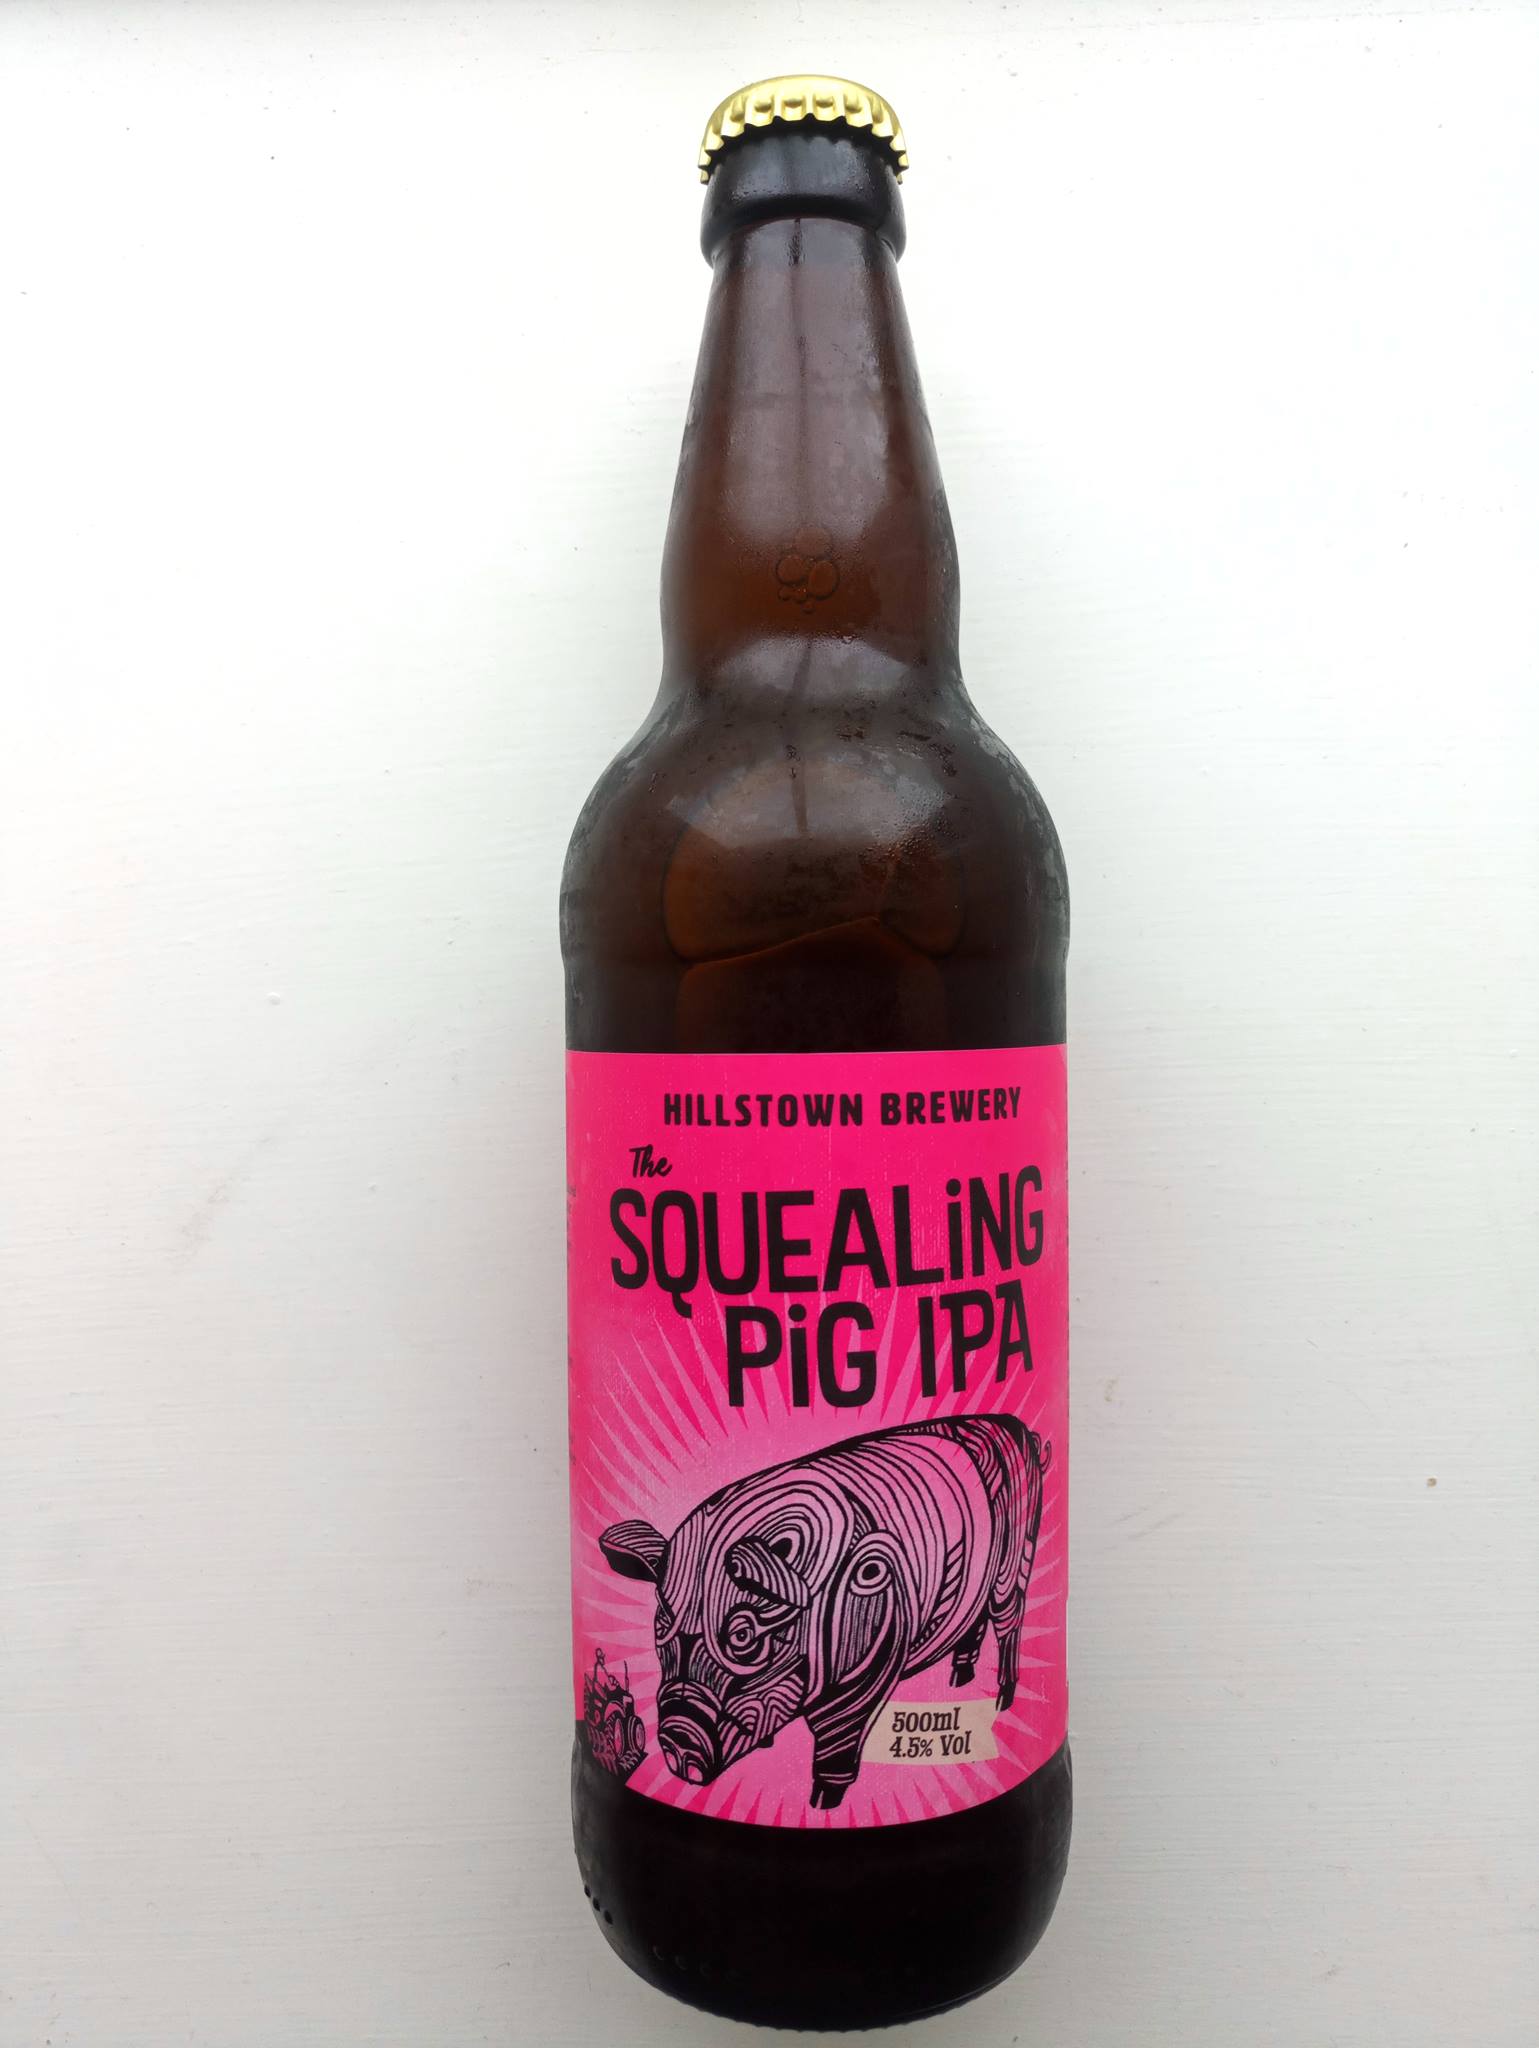 The Squealing Pig IPA